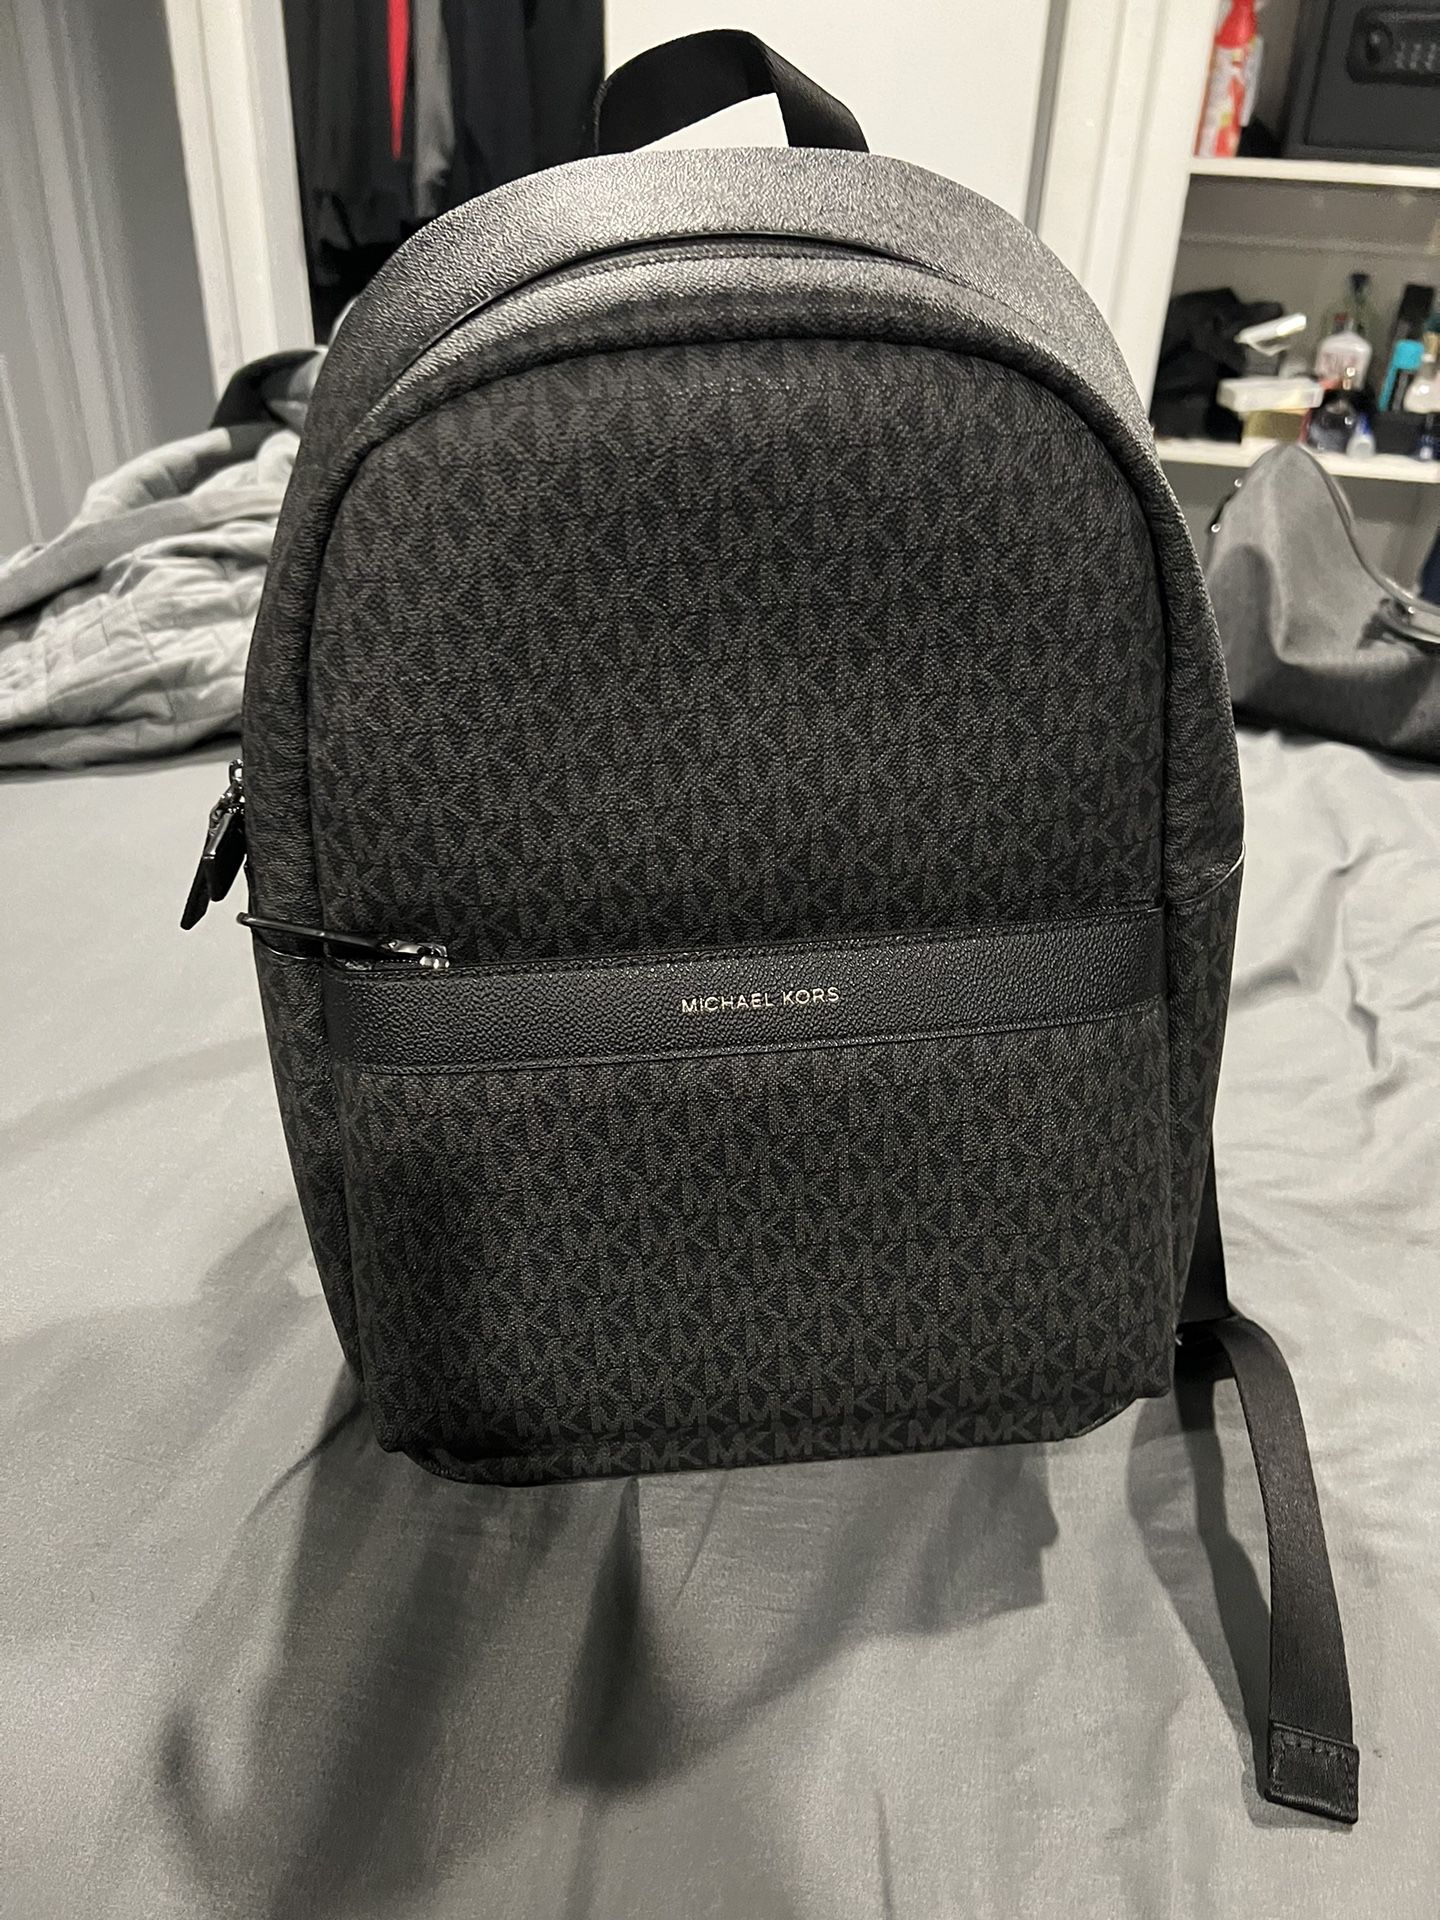 Micheal Kors Greyson Backpack for Sale in Cherry Hill, NJ - OfferUp